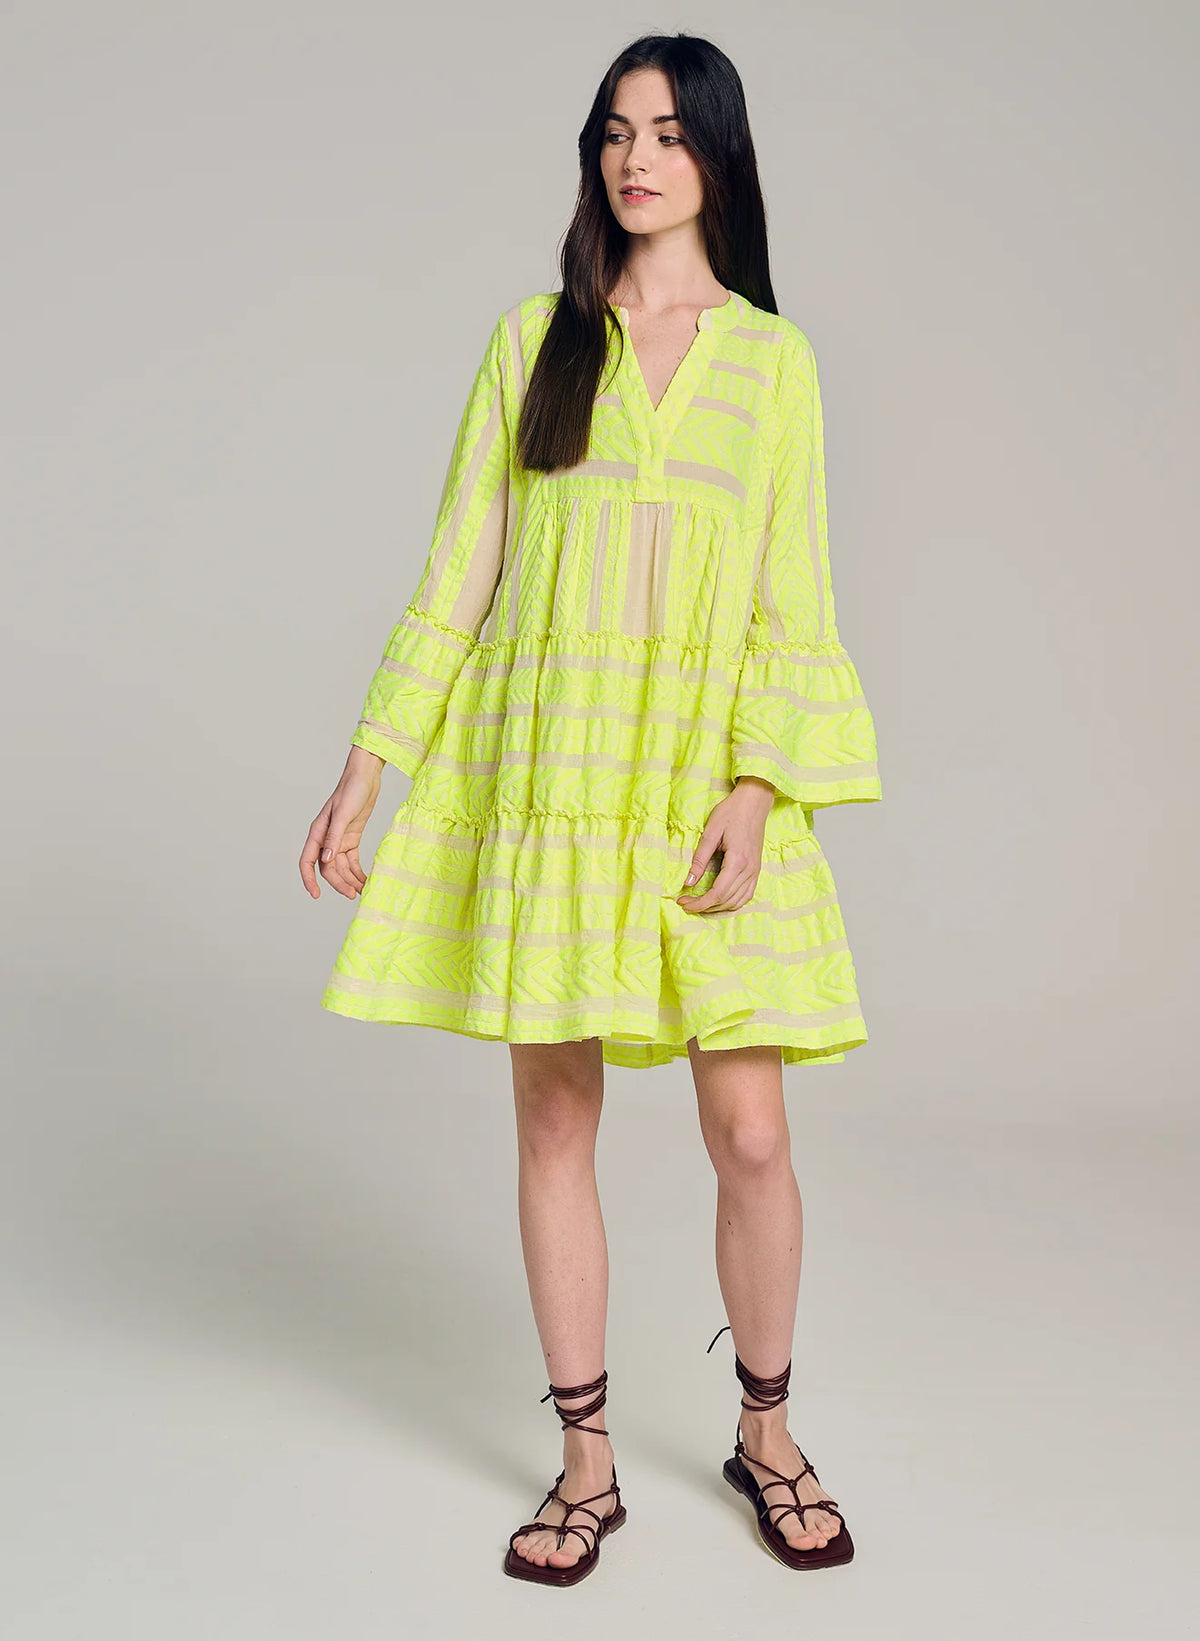 Ecru notch neck above the knee dress with long fluted sleeves and tripe tiered A line skirt with neon lime embroidery throughout